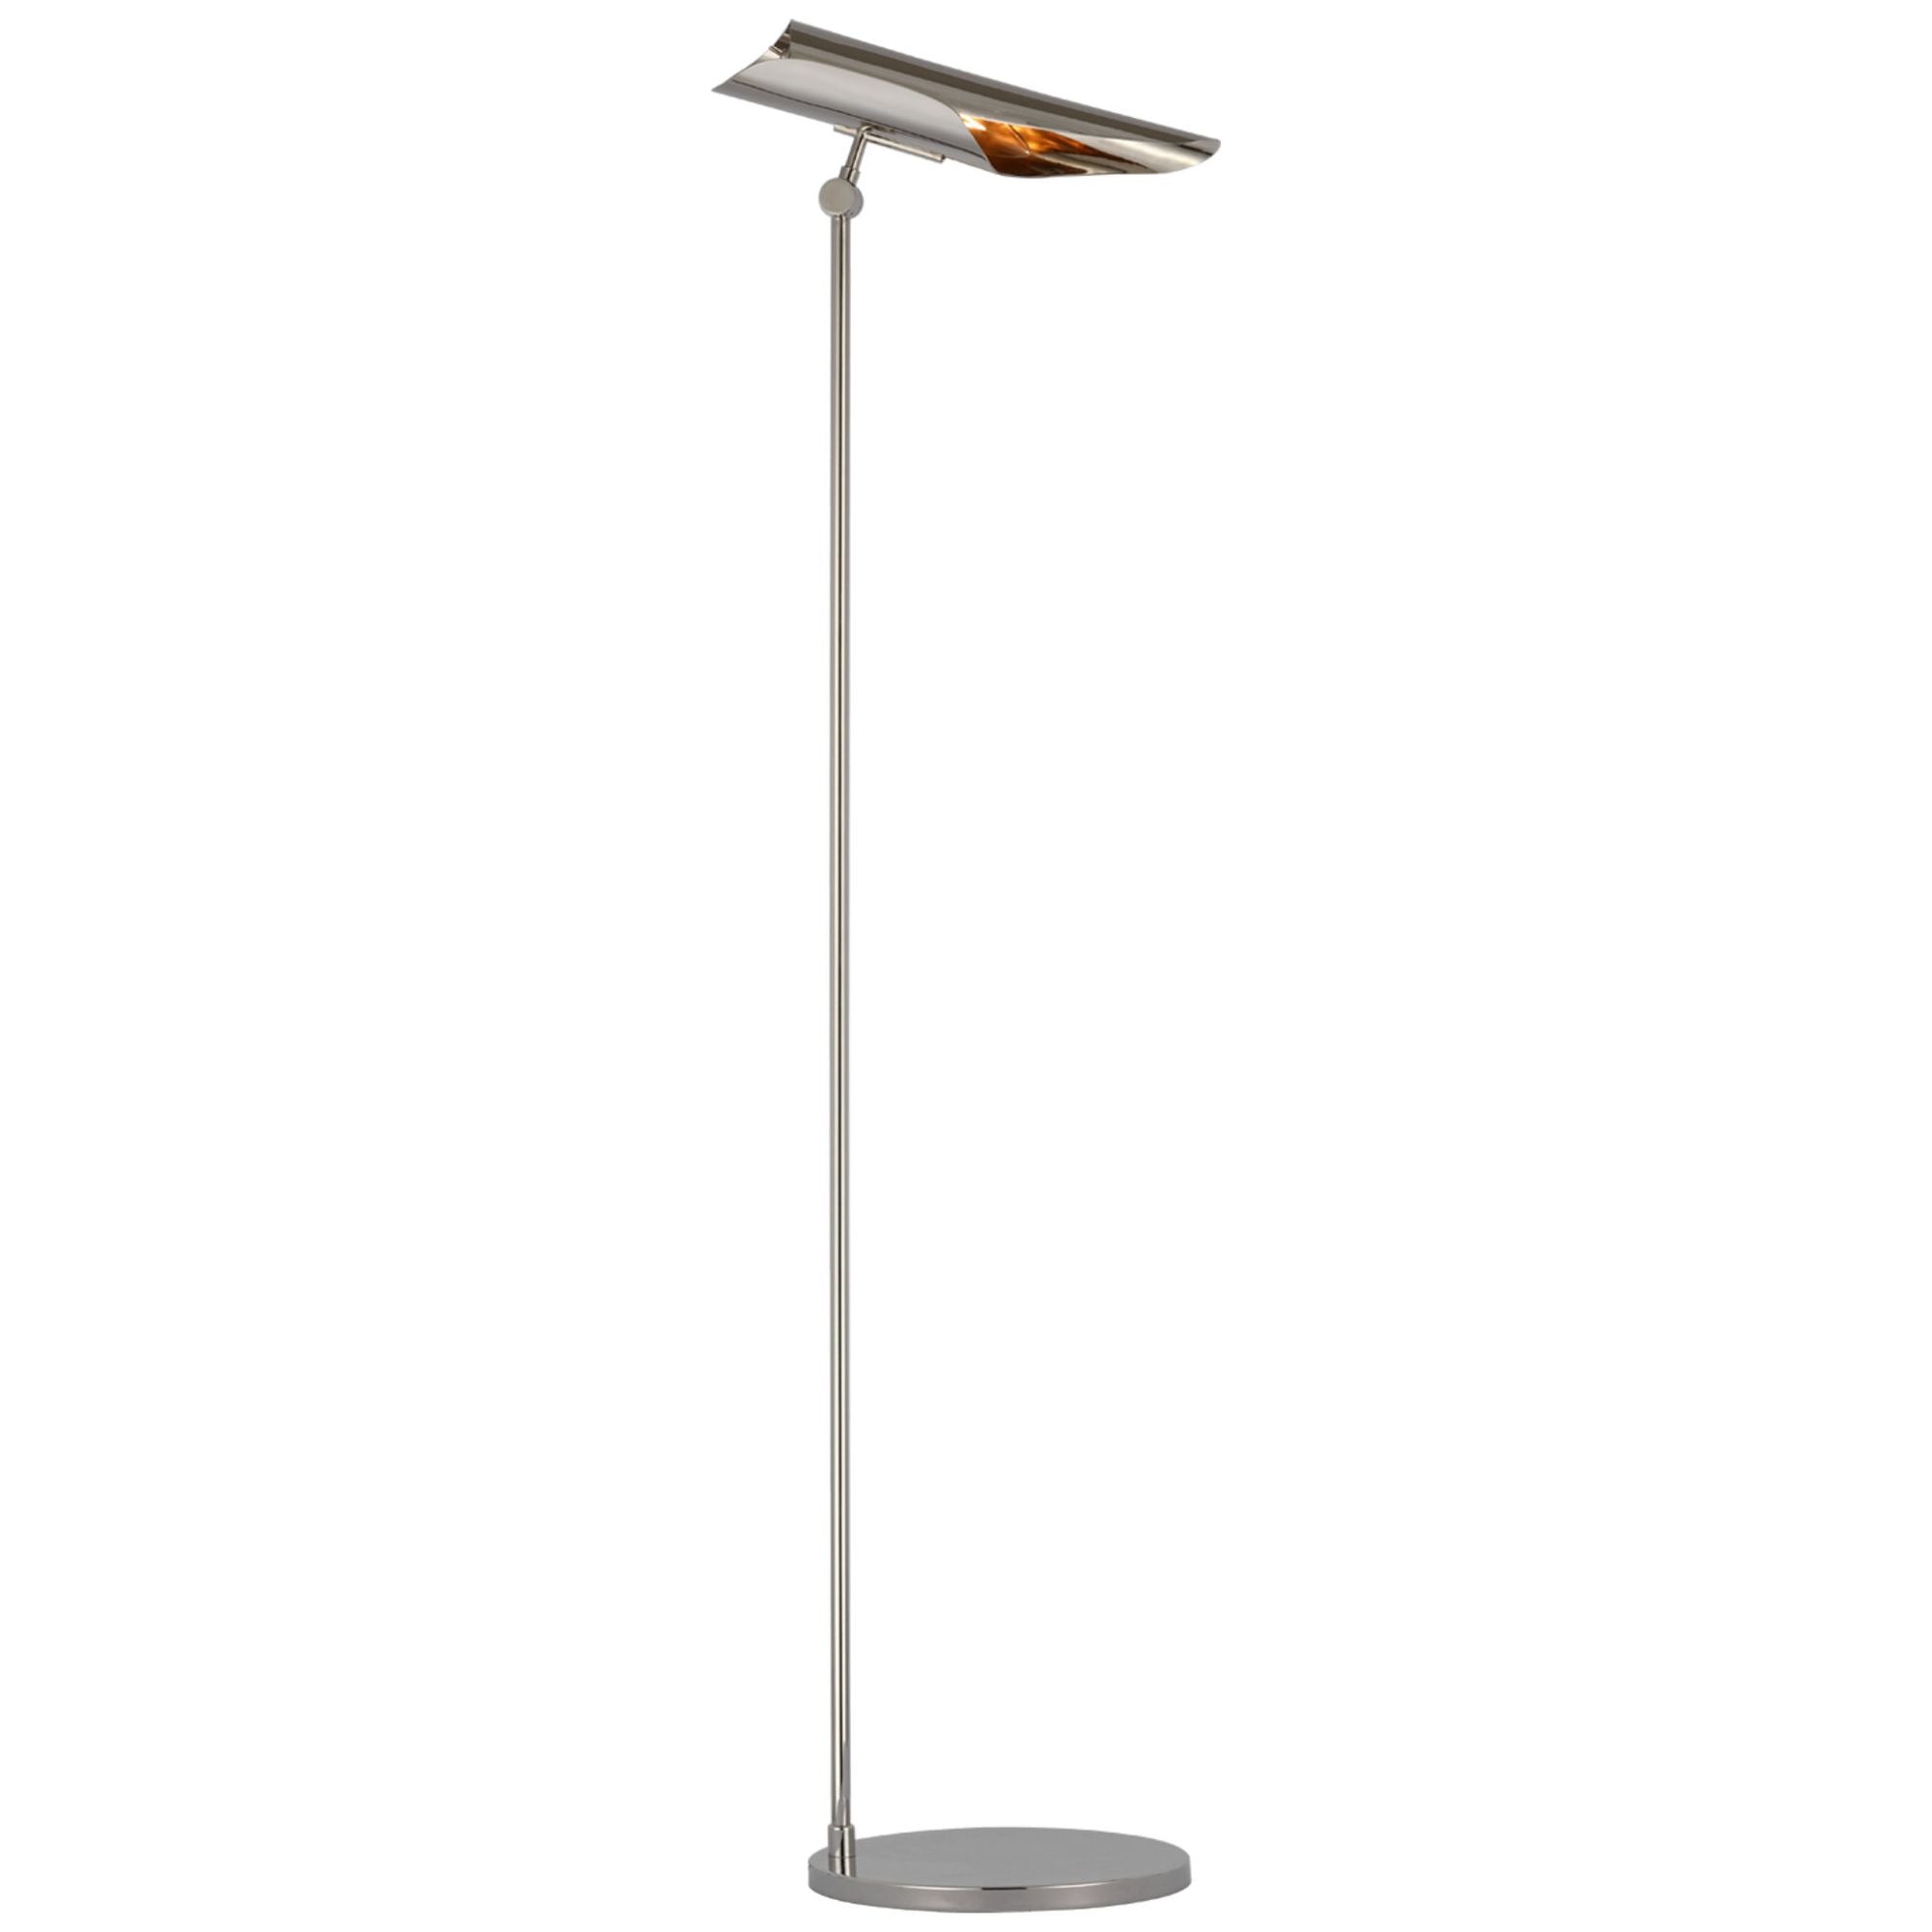 Champalimaud Flore Floor Lamp in Polished Nickel